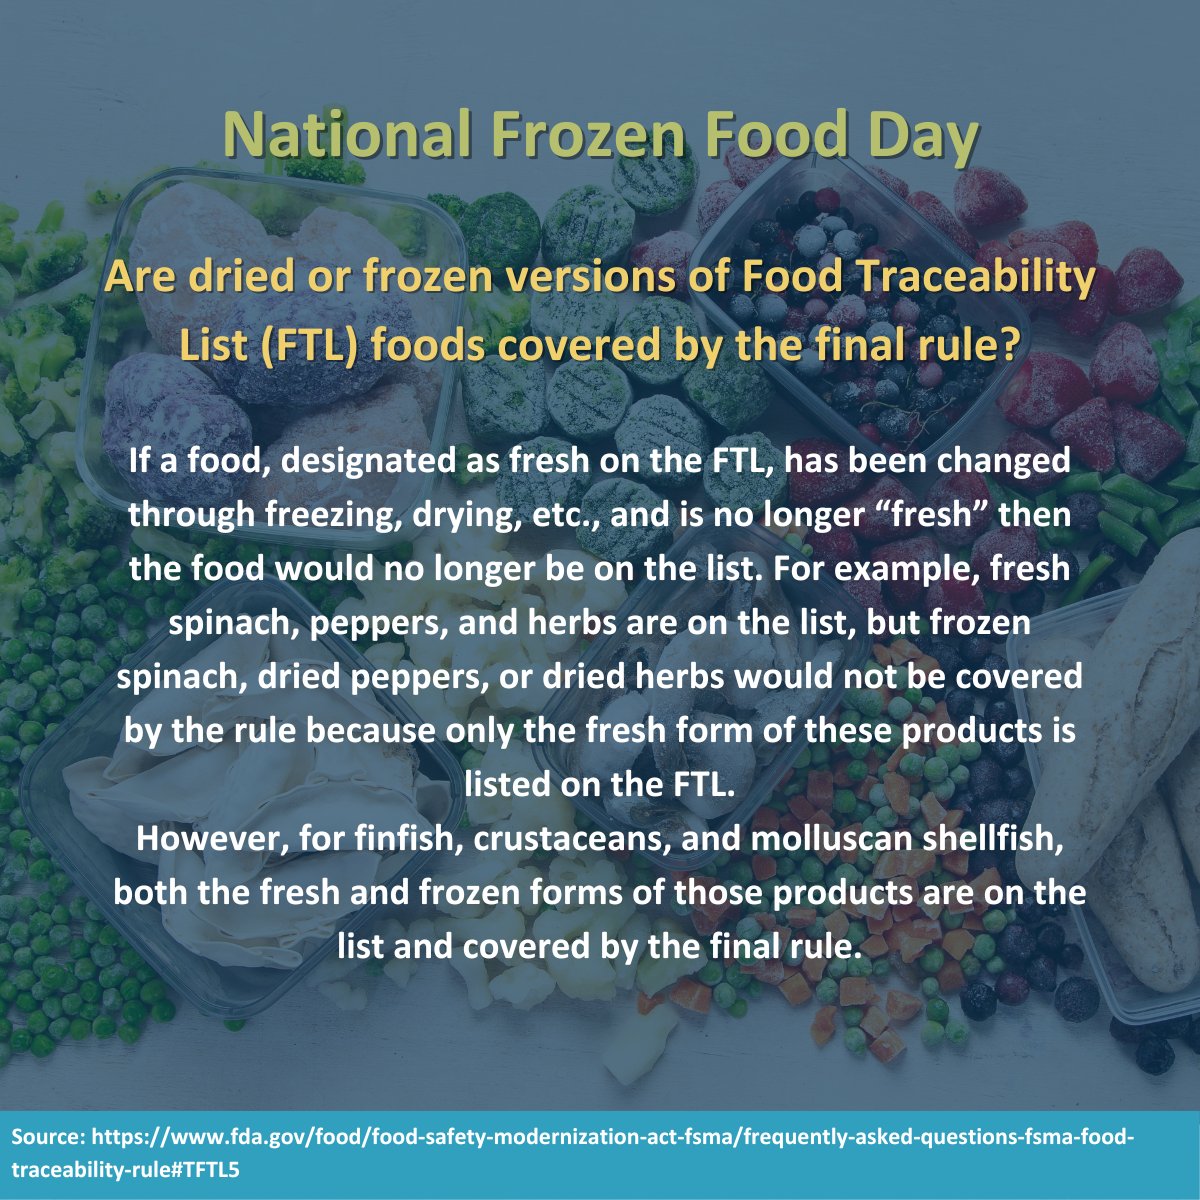 Today is #NationalFrozenFoodDay, celebrating the preservation, quality, convenience, and value frozen food provides. Some frozen foods are covered by FSMA Rule 204 - click here to learn more about frozen foods and FSMA 204: fda.gov/food/food-safe…